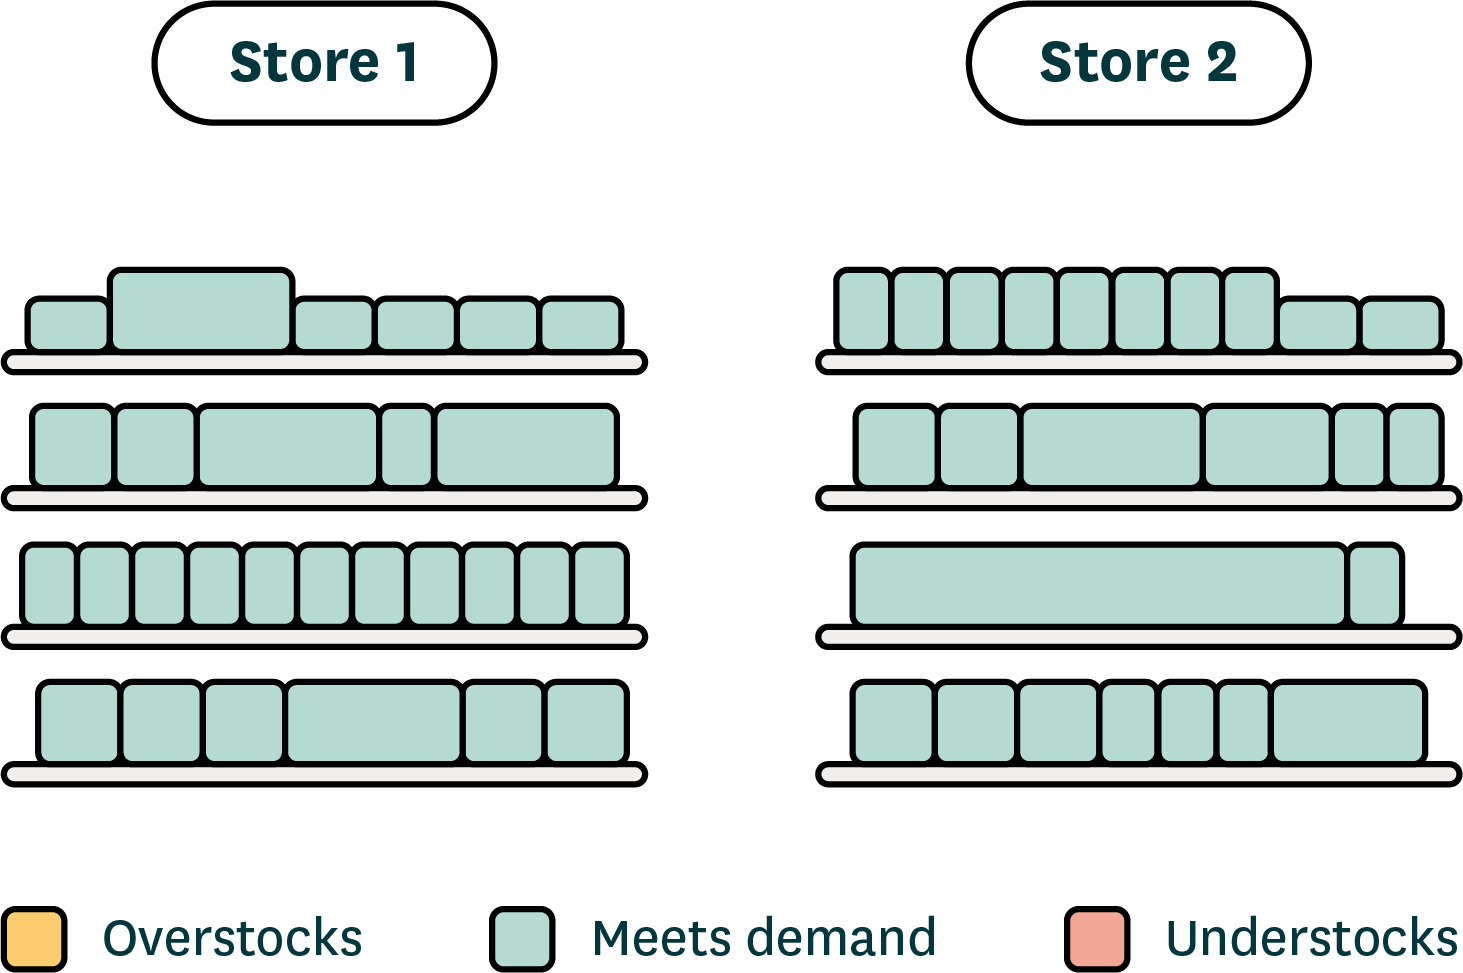 A comparison of shelves and inventory levels between two stores. Both use store-specific planogramming, which results in balanced inventory levels that meet each store’s unique demand patterns.